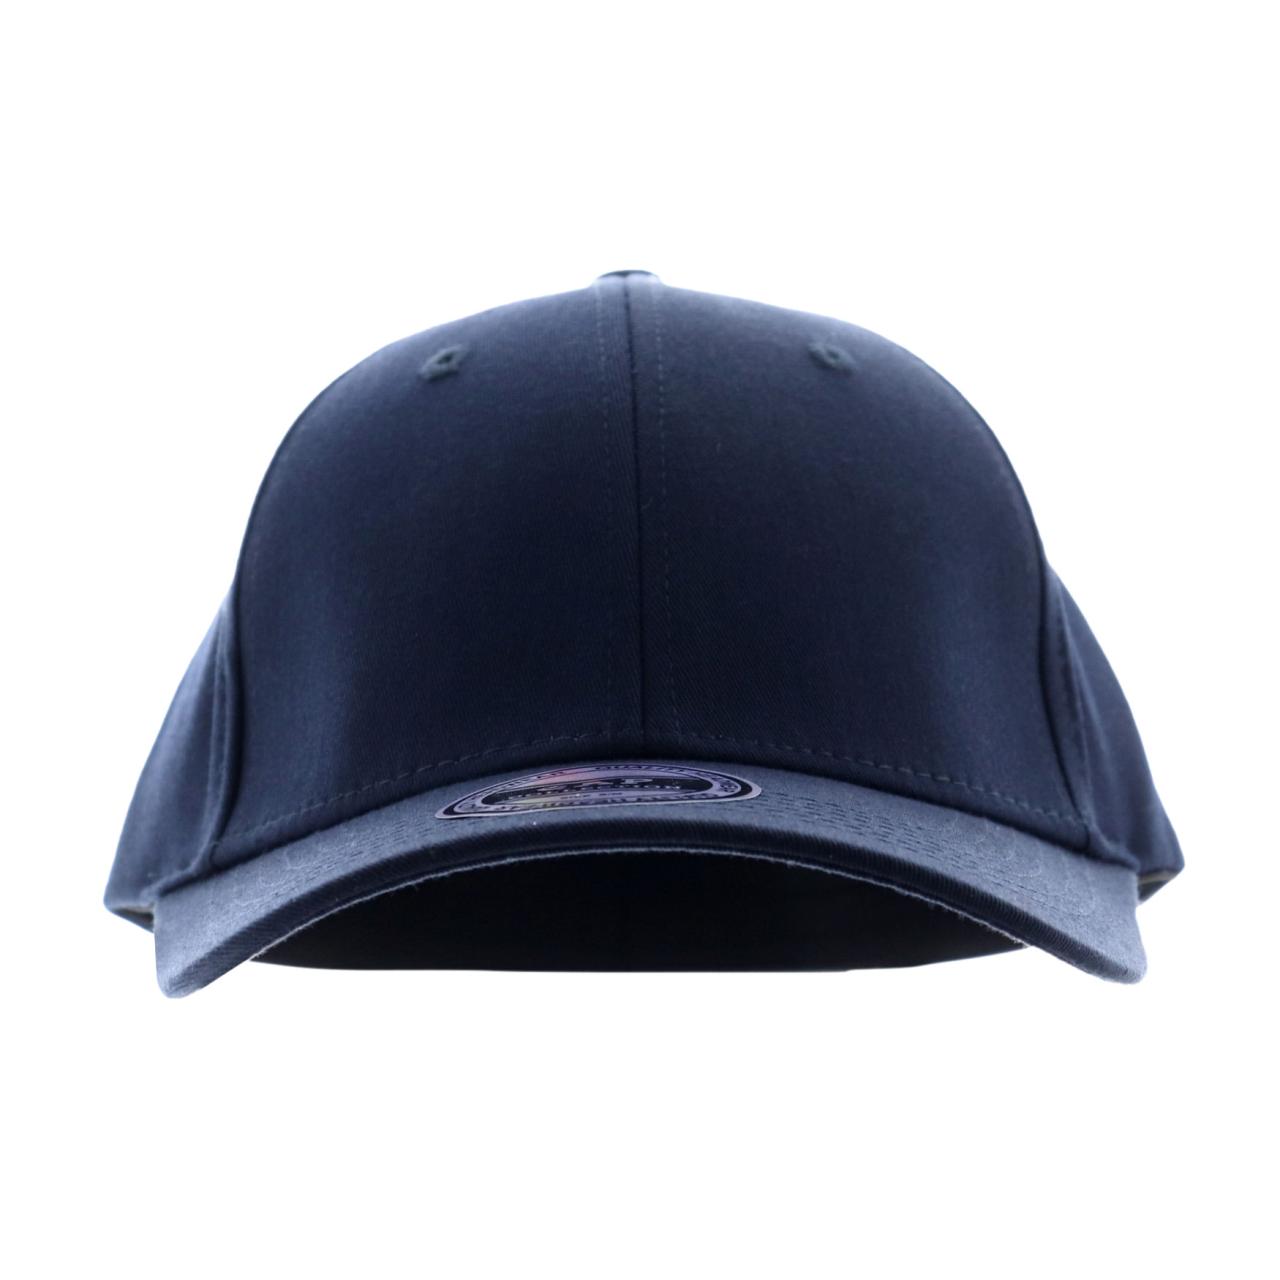 Baseball Cup  w/Elastic Band Navy Blue Size S/M